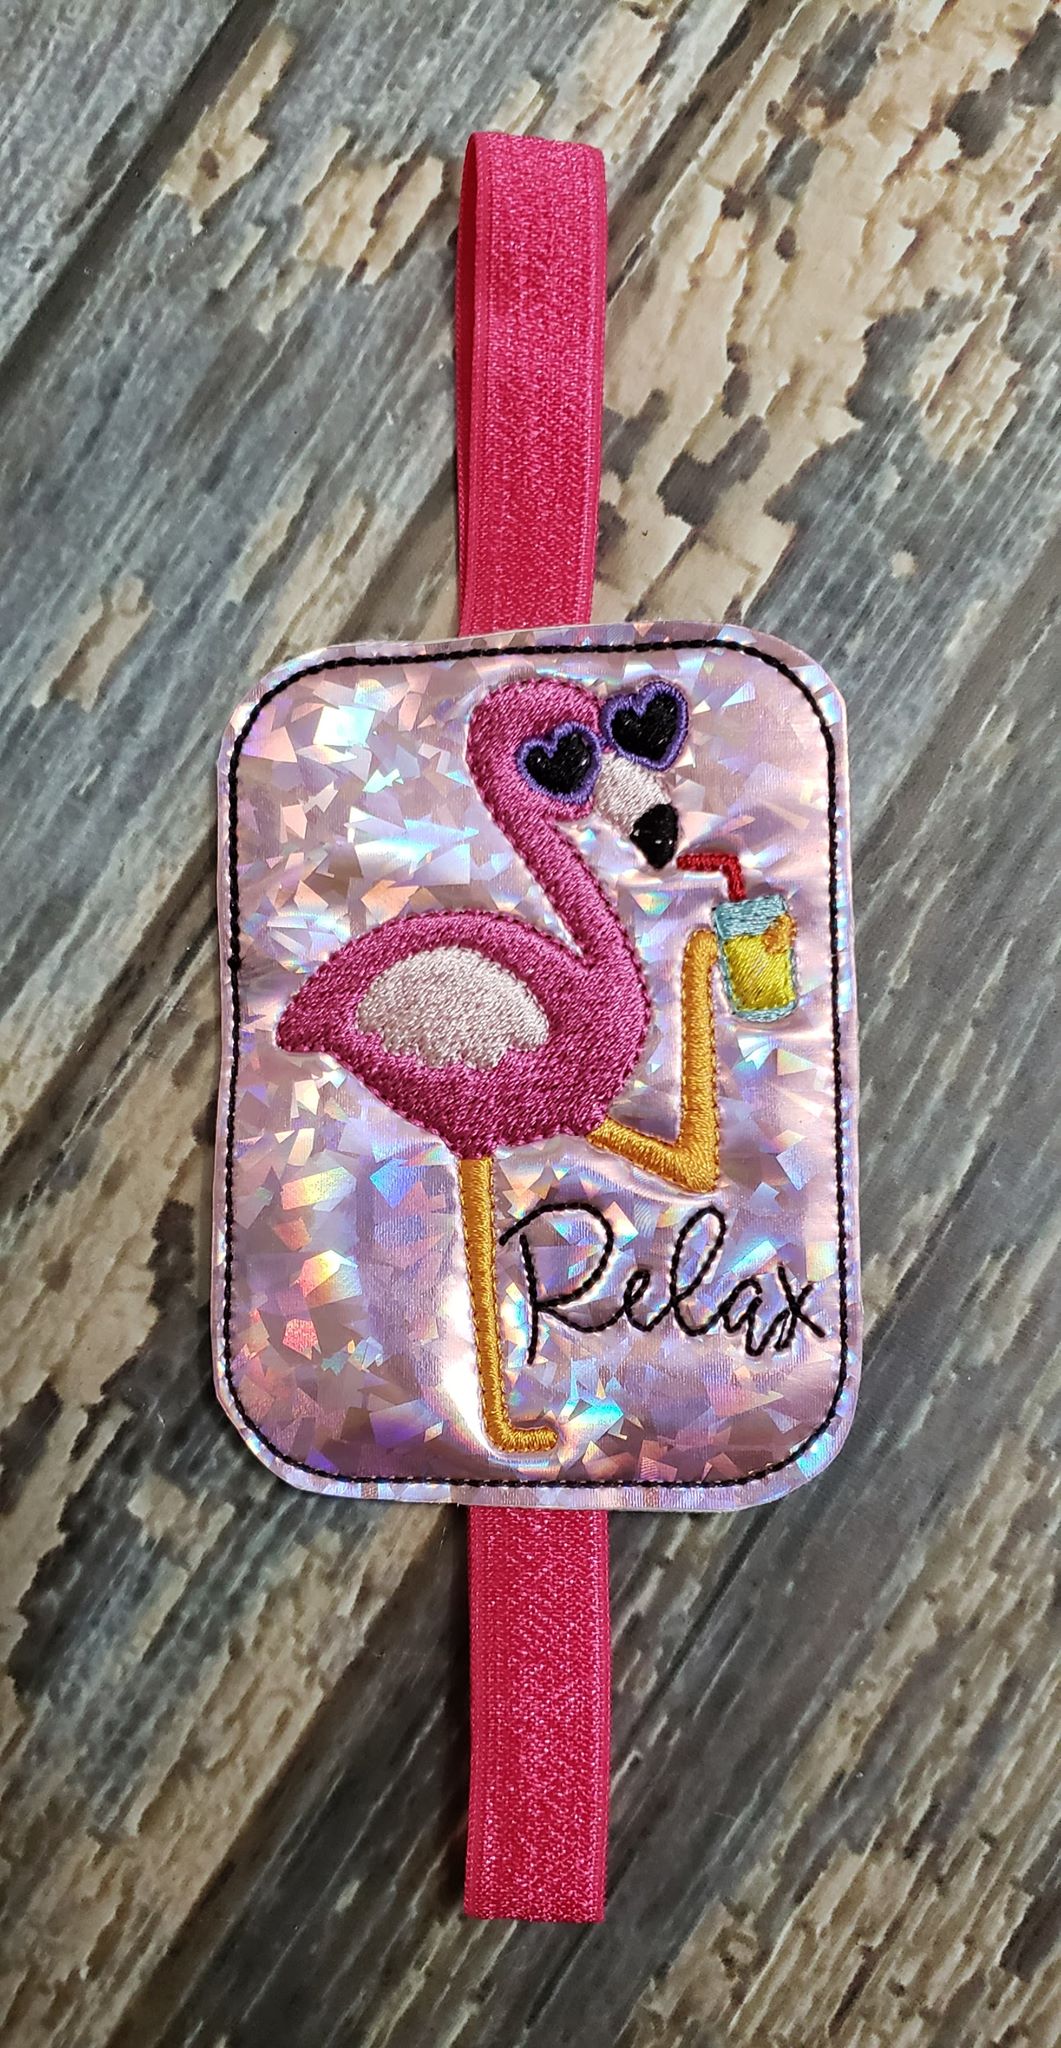 Relax Book Band - Digital Embroidery Design